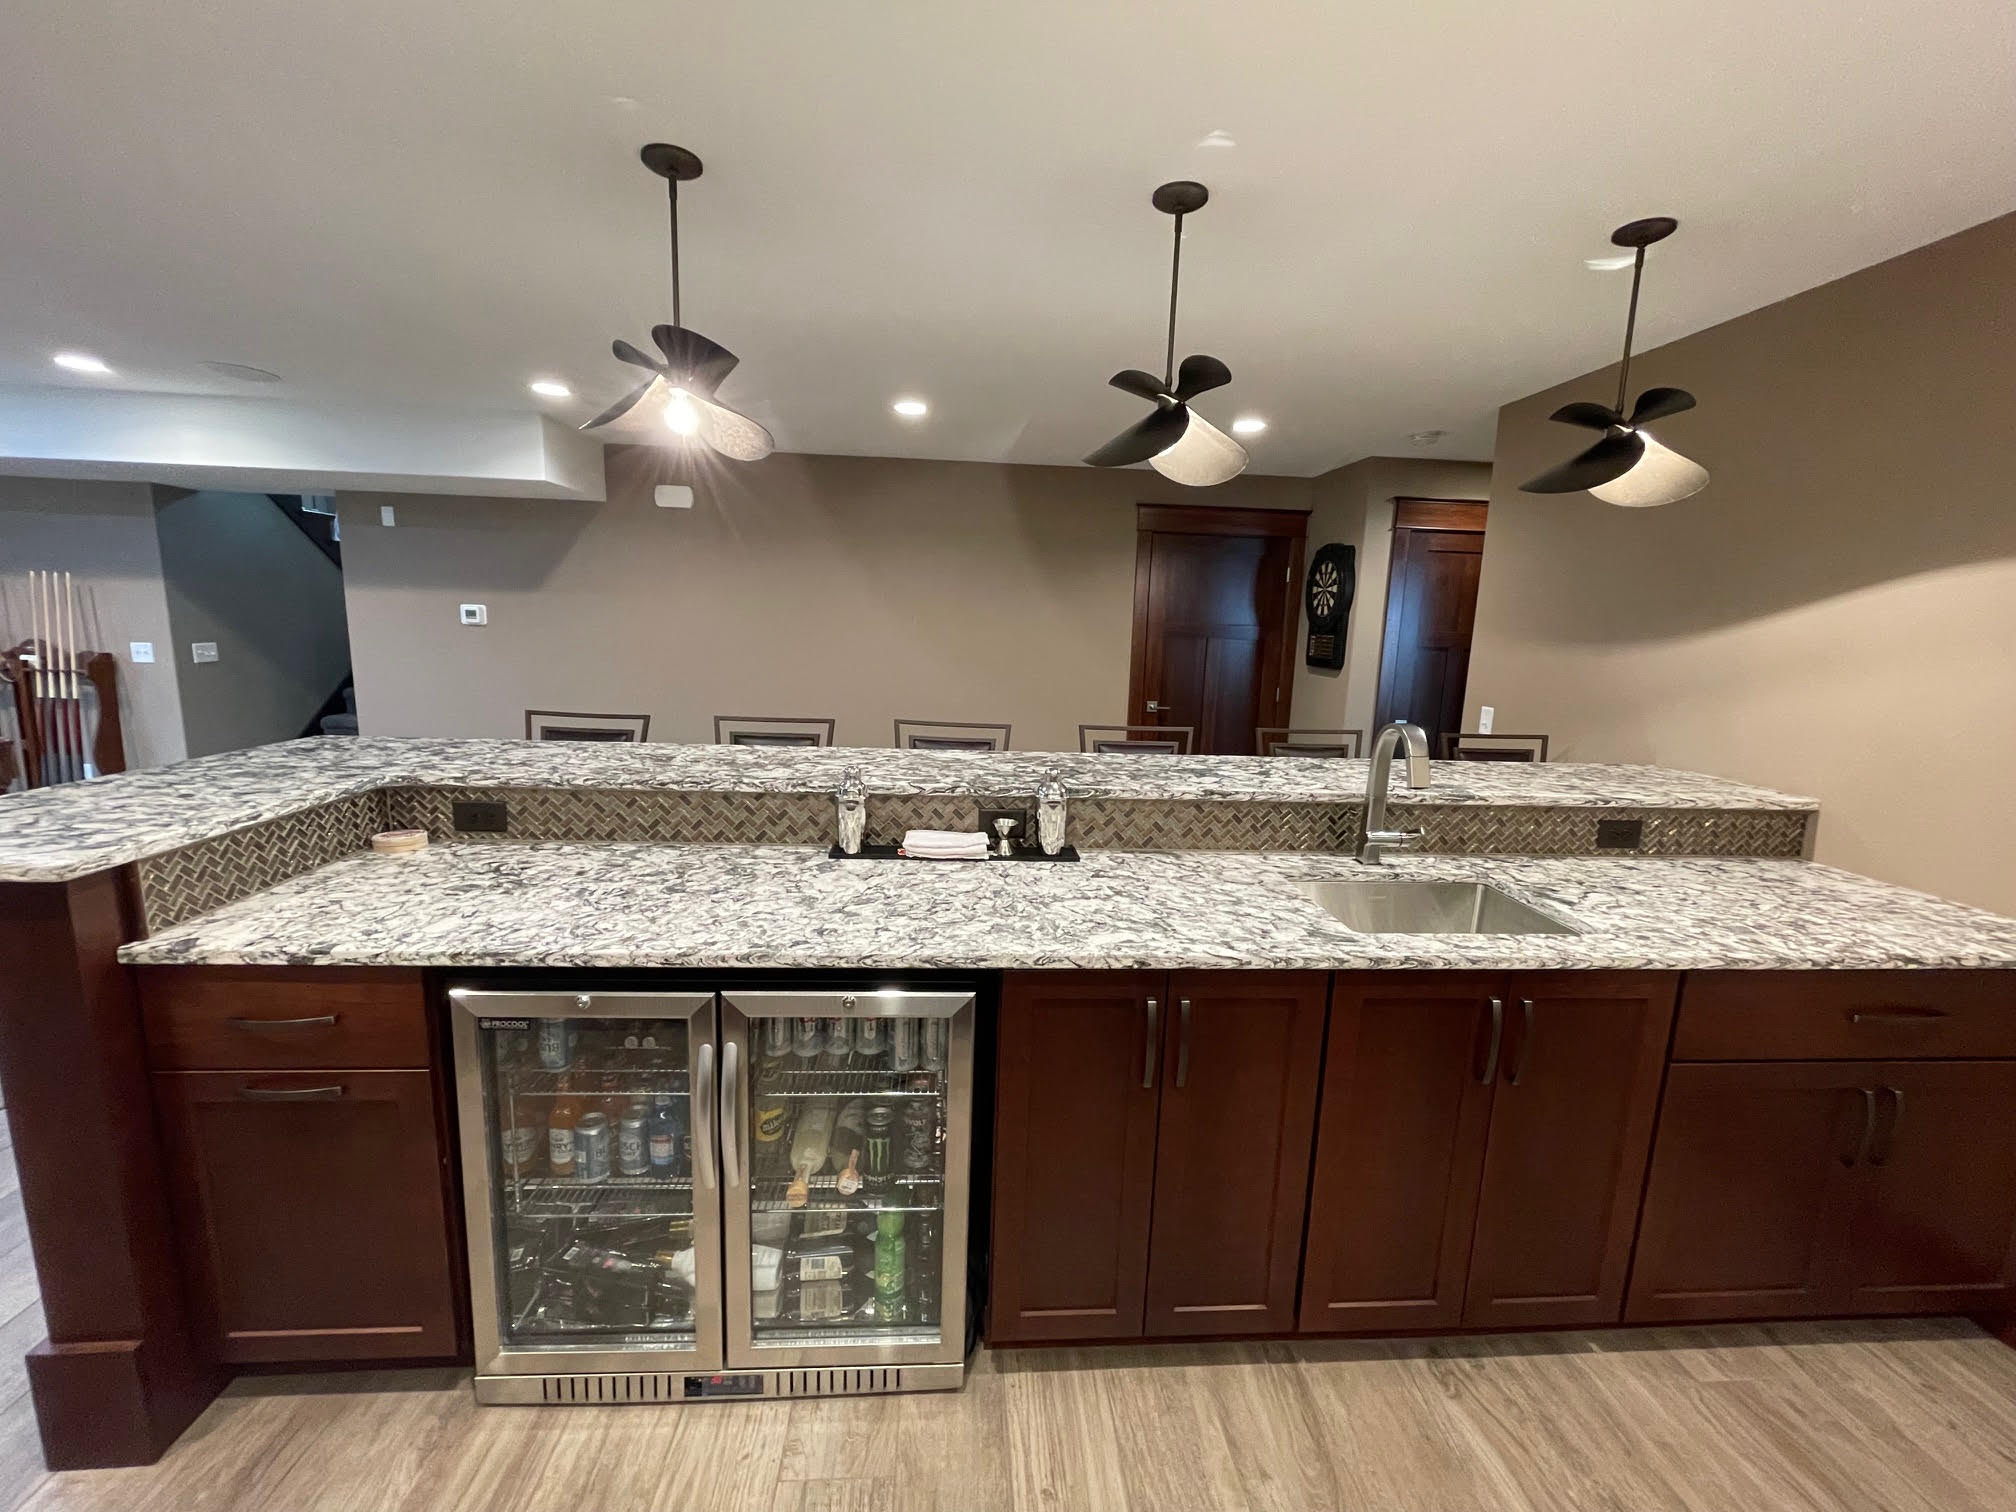 Wet bar in finished basement with gray granite countertops and patterned backsplash